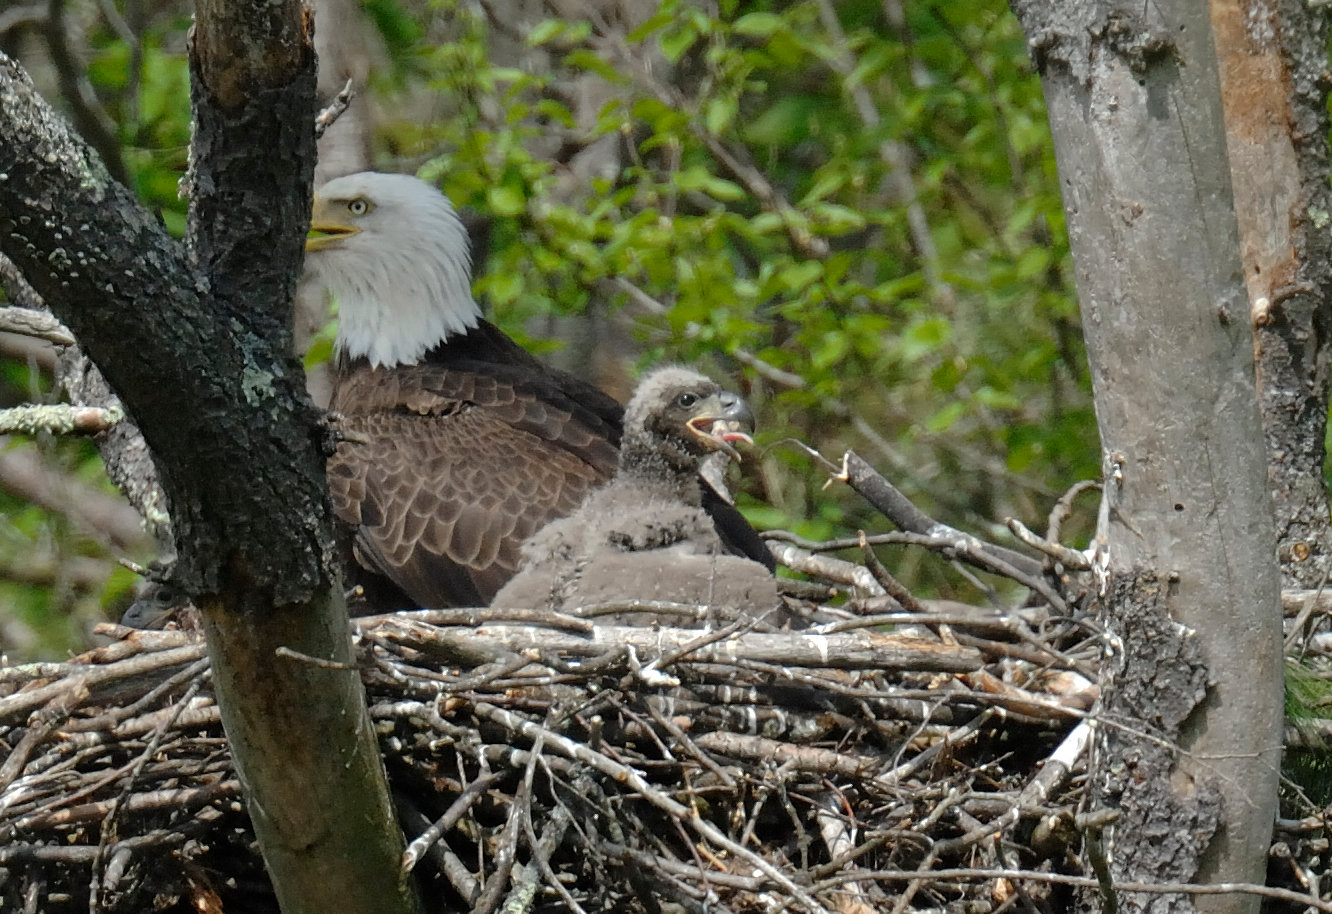 This eaglet is about 3 weeks old and has its gray secondary coat of down feathers. These feathers are thicker than primary down feathers which helps the eaglet stay worm during cooler days. A few tiny pin feathers are already pushing through the down, and the shafts of flight feathers are visible on the trailing edge of the wings. ..